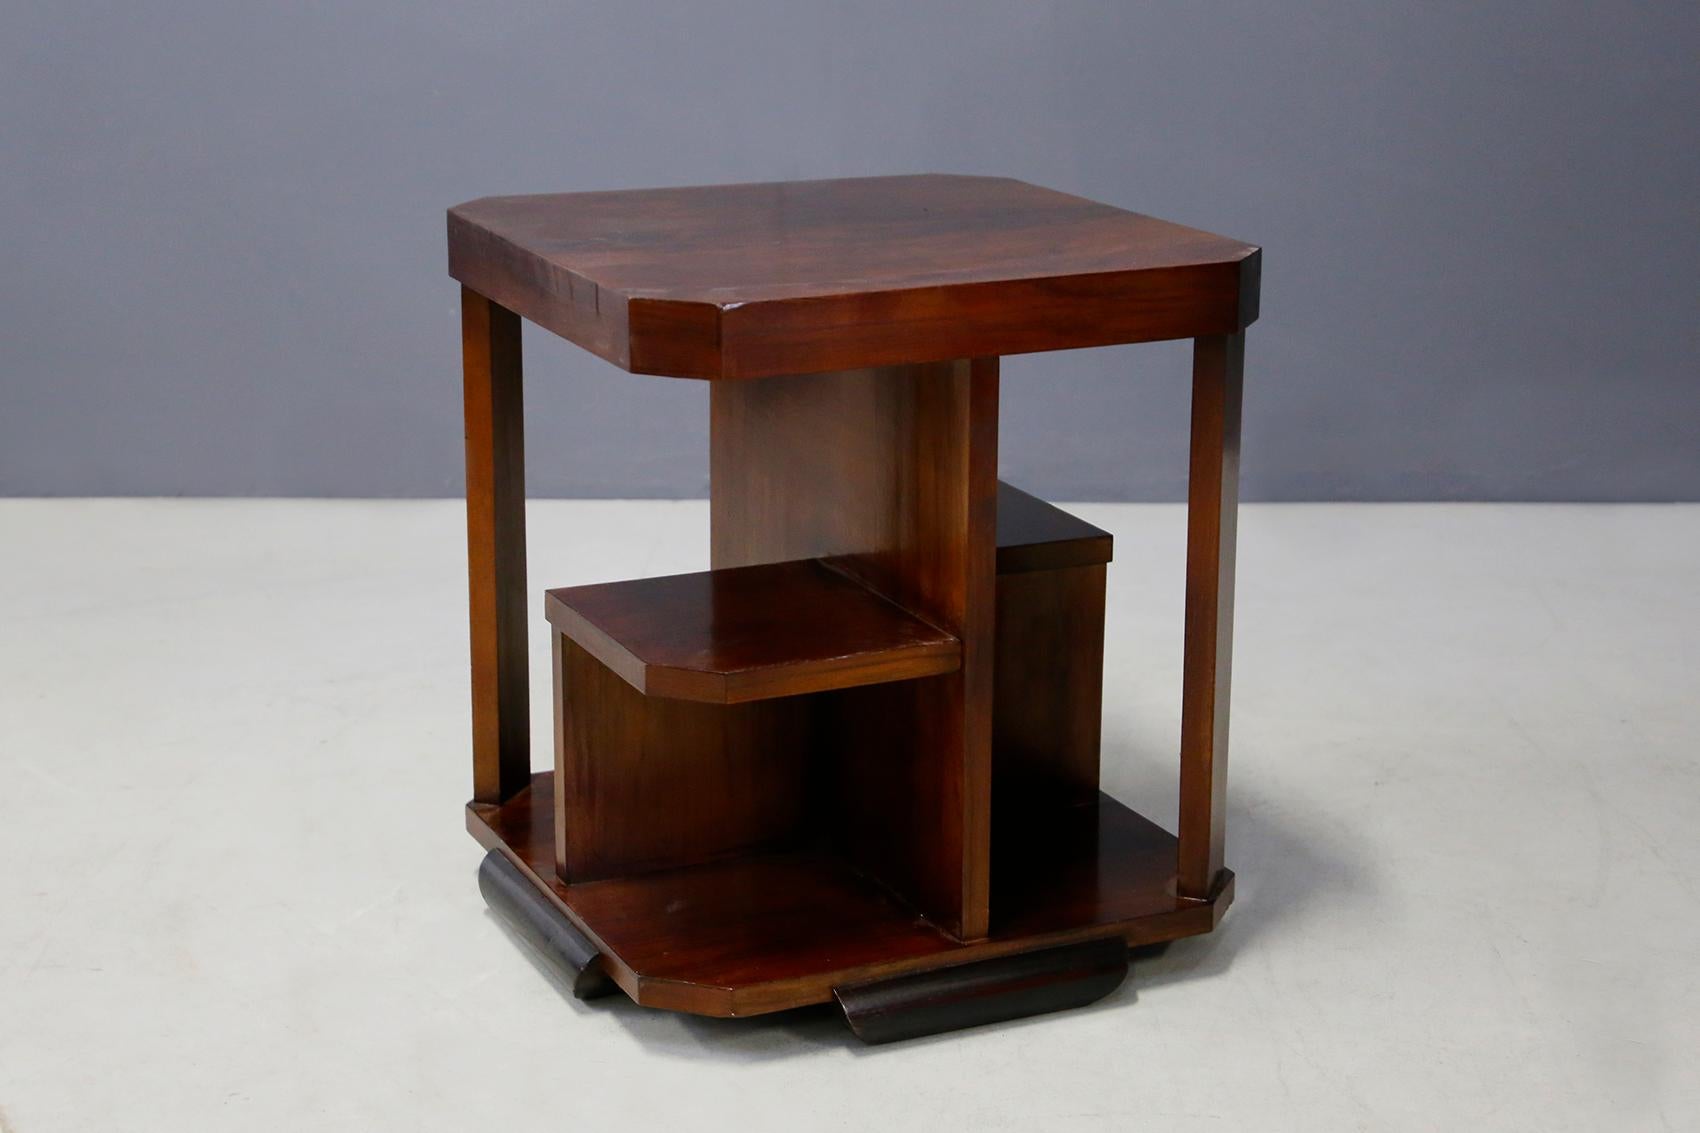 Mid-20th Century Coffee Table Art Deco Attributed to Gio Ponti in Walnut, 1930s